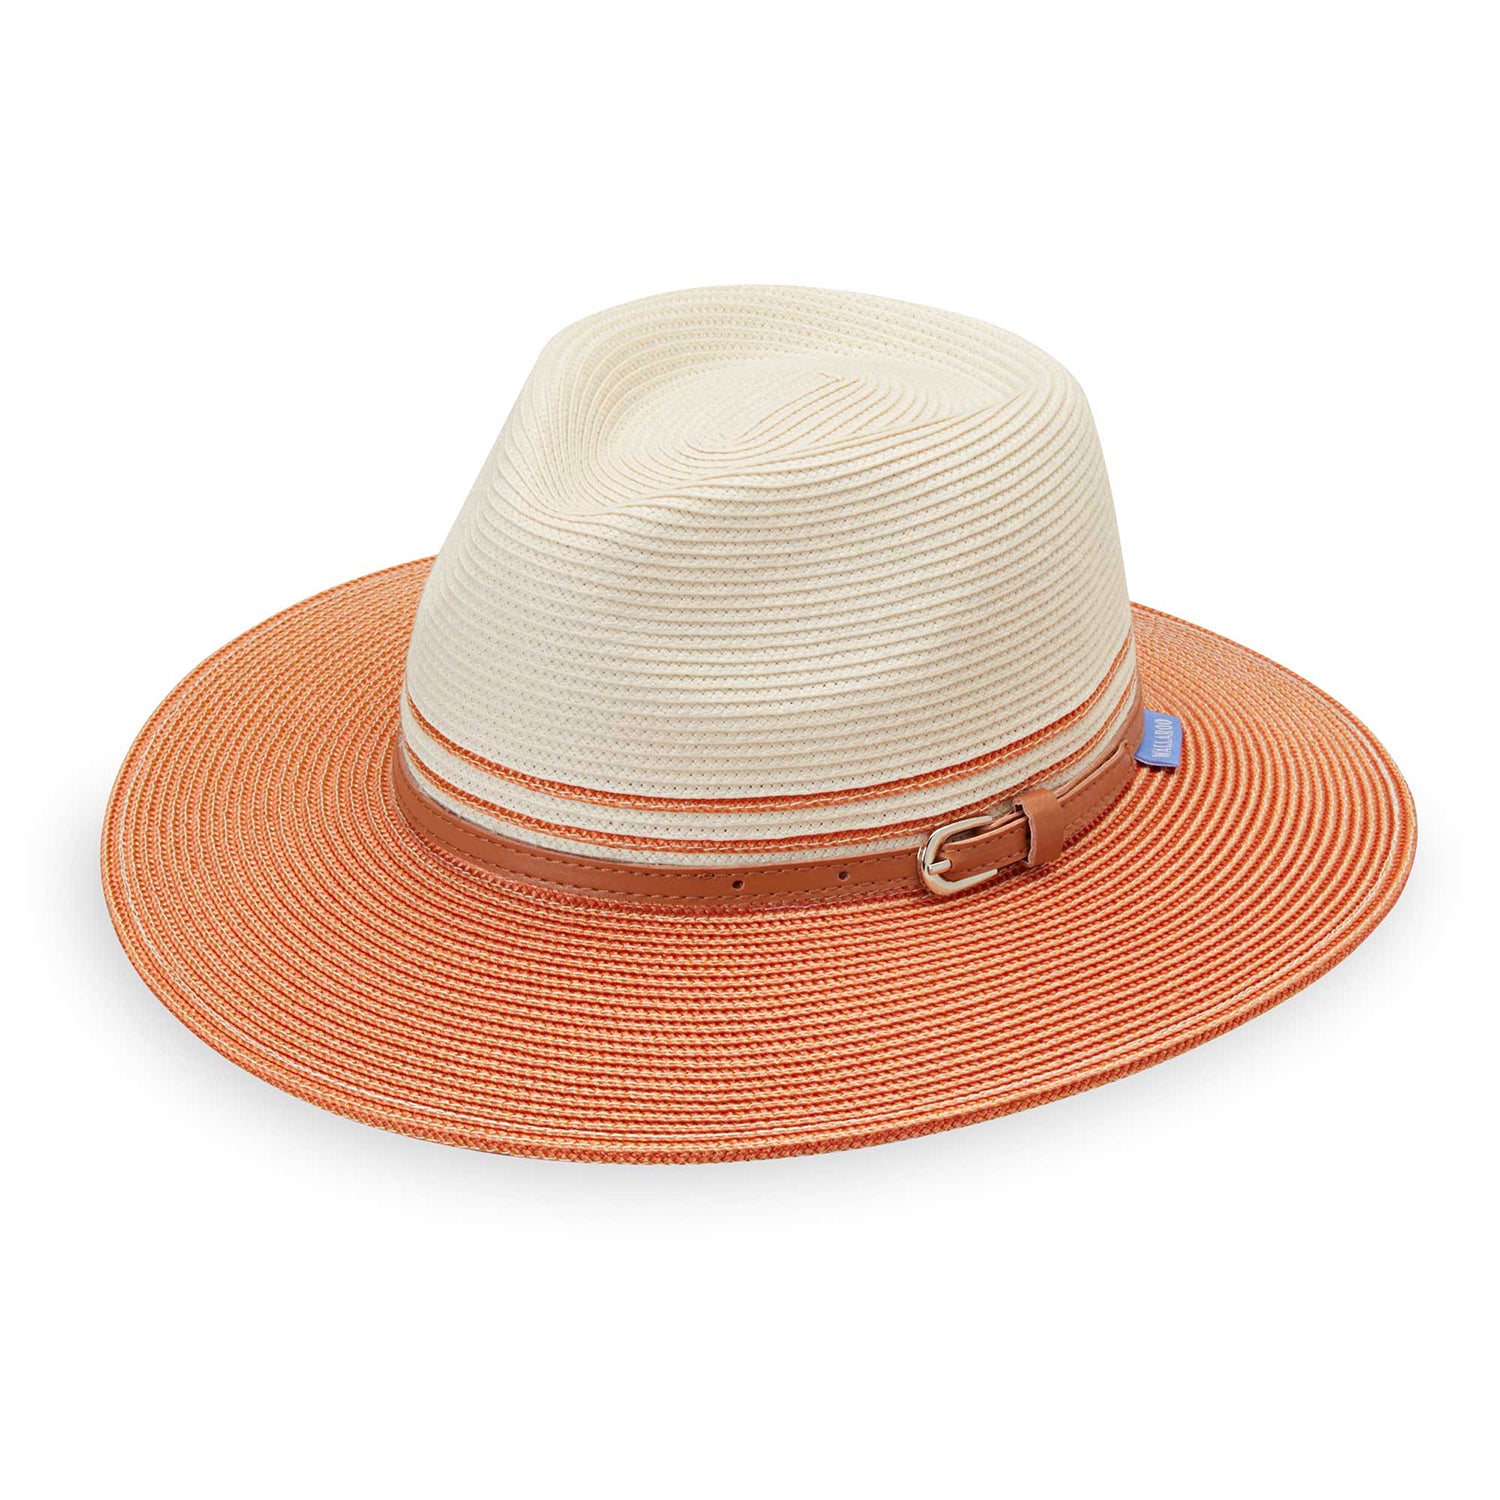 Featuring women's petite fedora summer sun hat by Wallaroo. Made with packable material